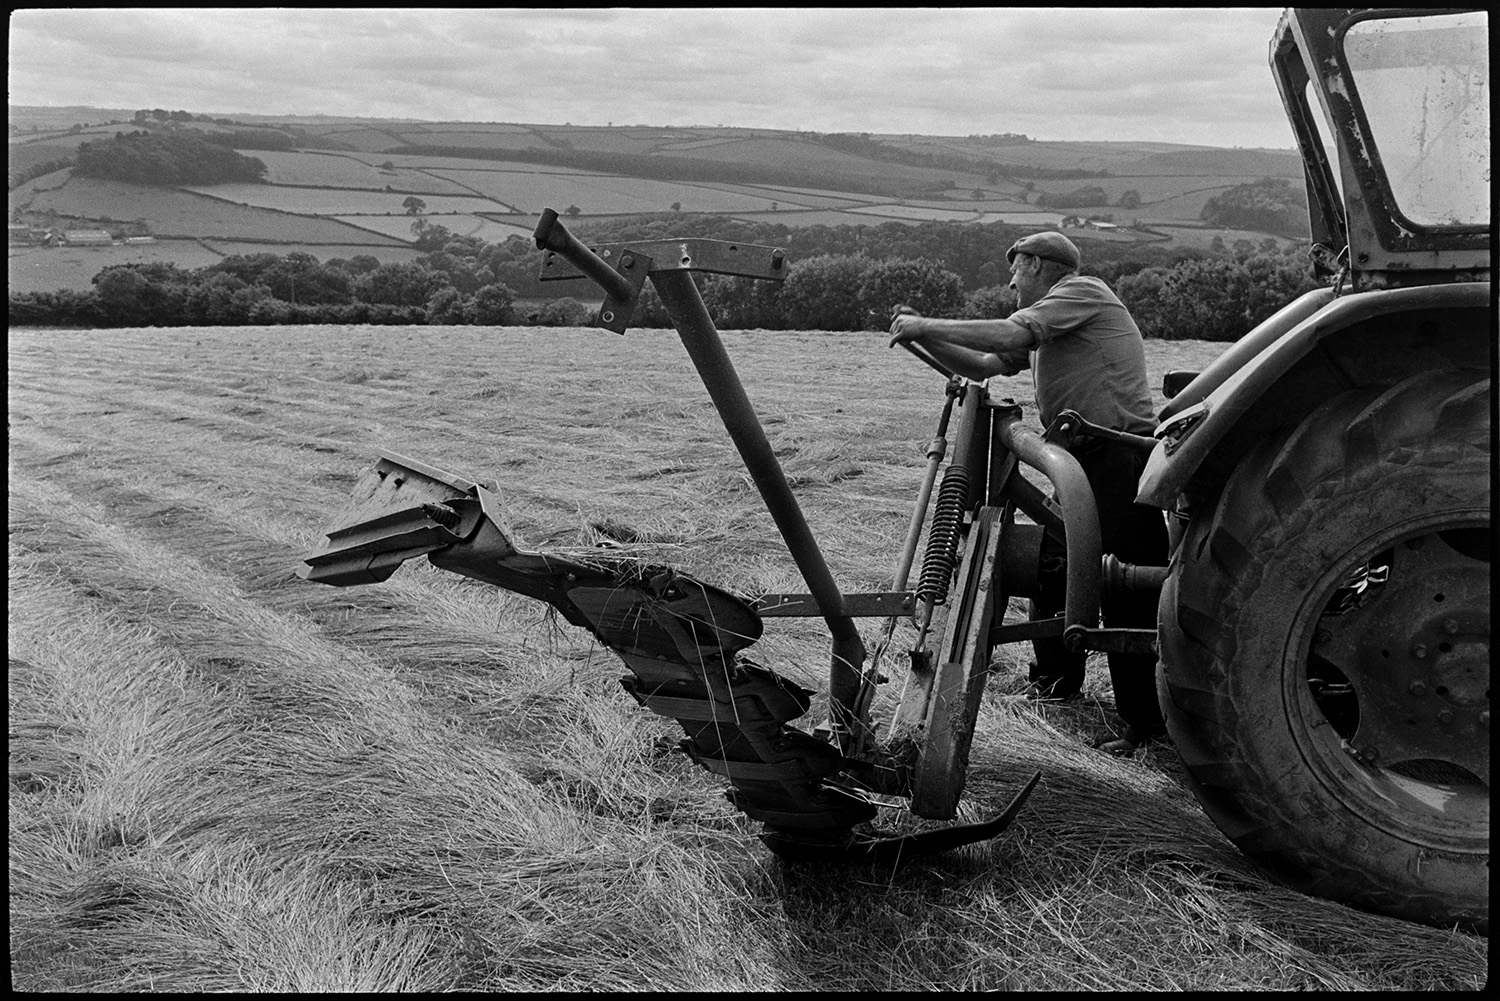 Tractor and grass cutter, mower, farmer folding up cutter. 
[George Ayre folding up a grass cutter attached to a tractor, in a field at Ashwell, Dolton. He has cut the field of grass for hay. A landscape of fields, hedgerows and trees is visible in the background.]